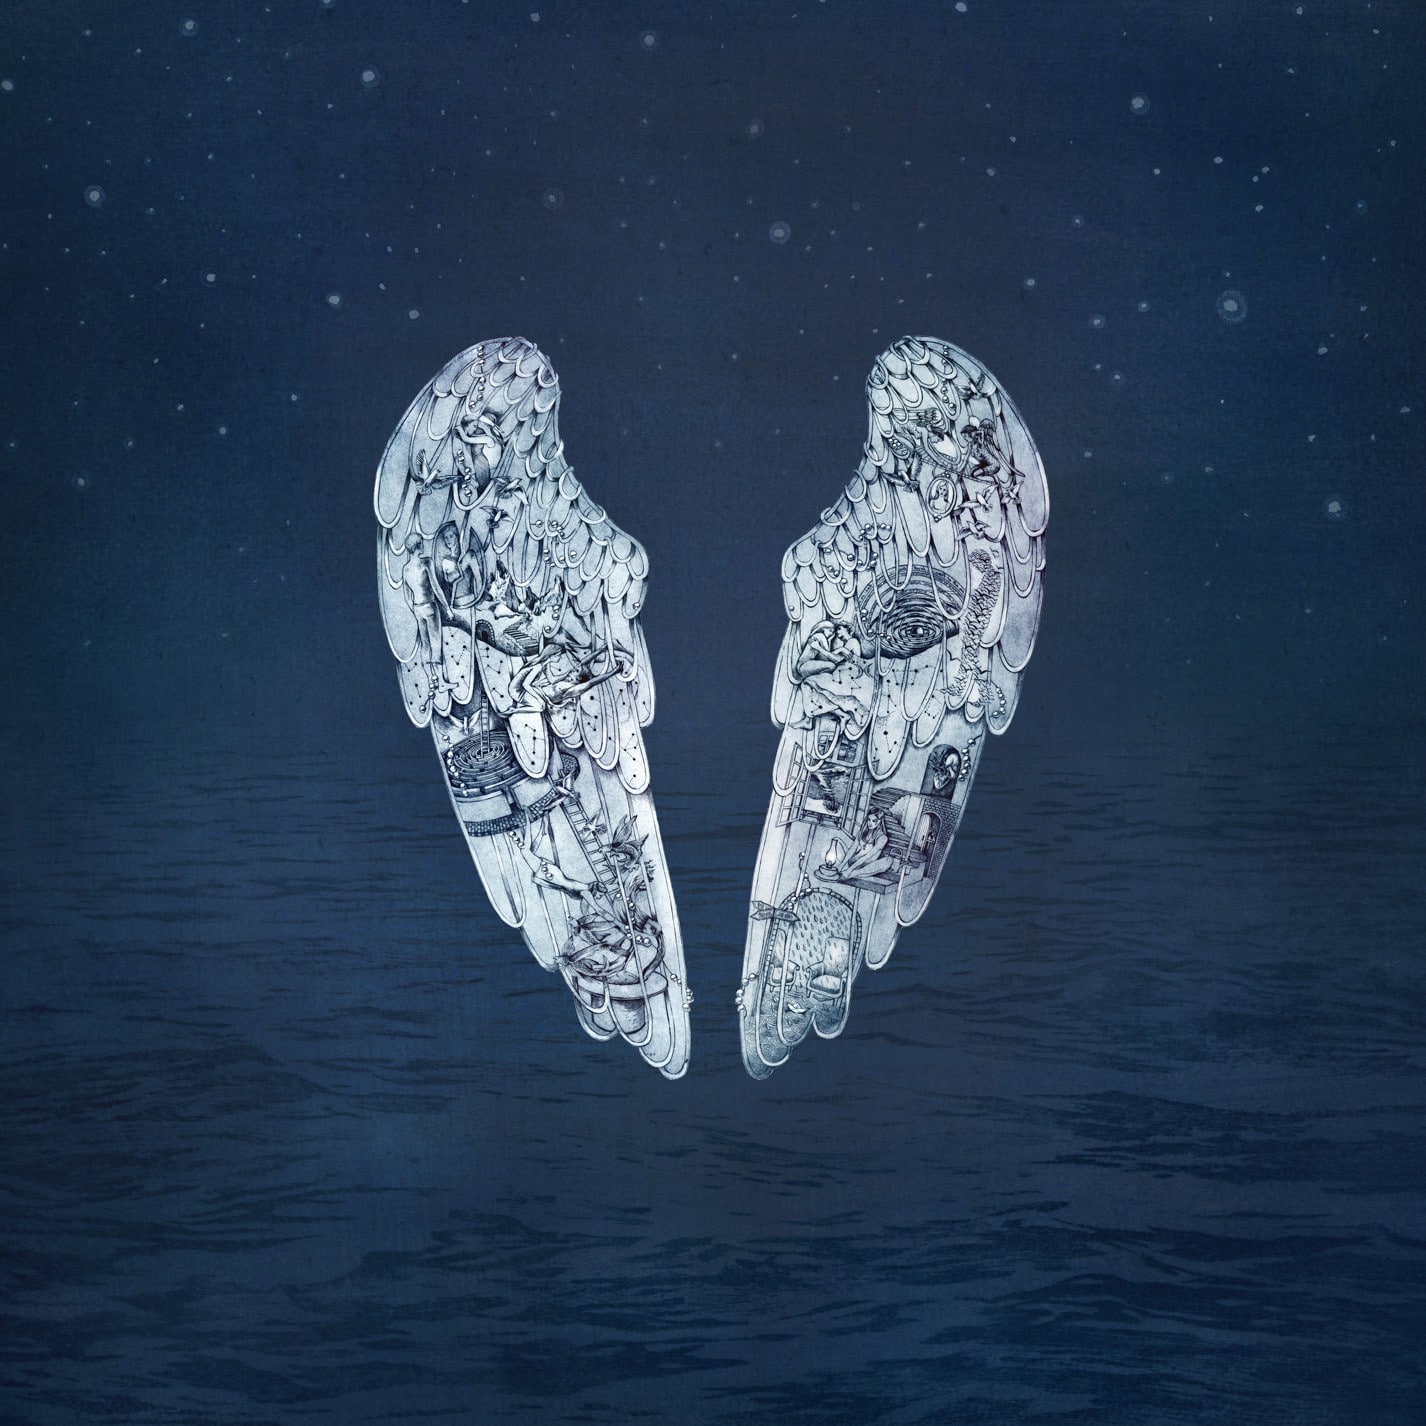 Album Image for Coldplay - Ghost Stories (Released 2014-05-16  by Parlophone/Atlantic)